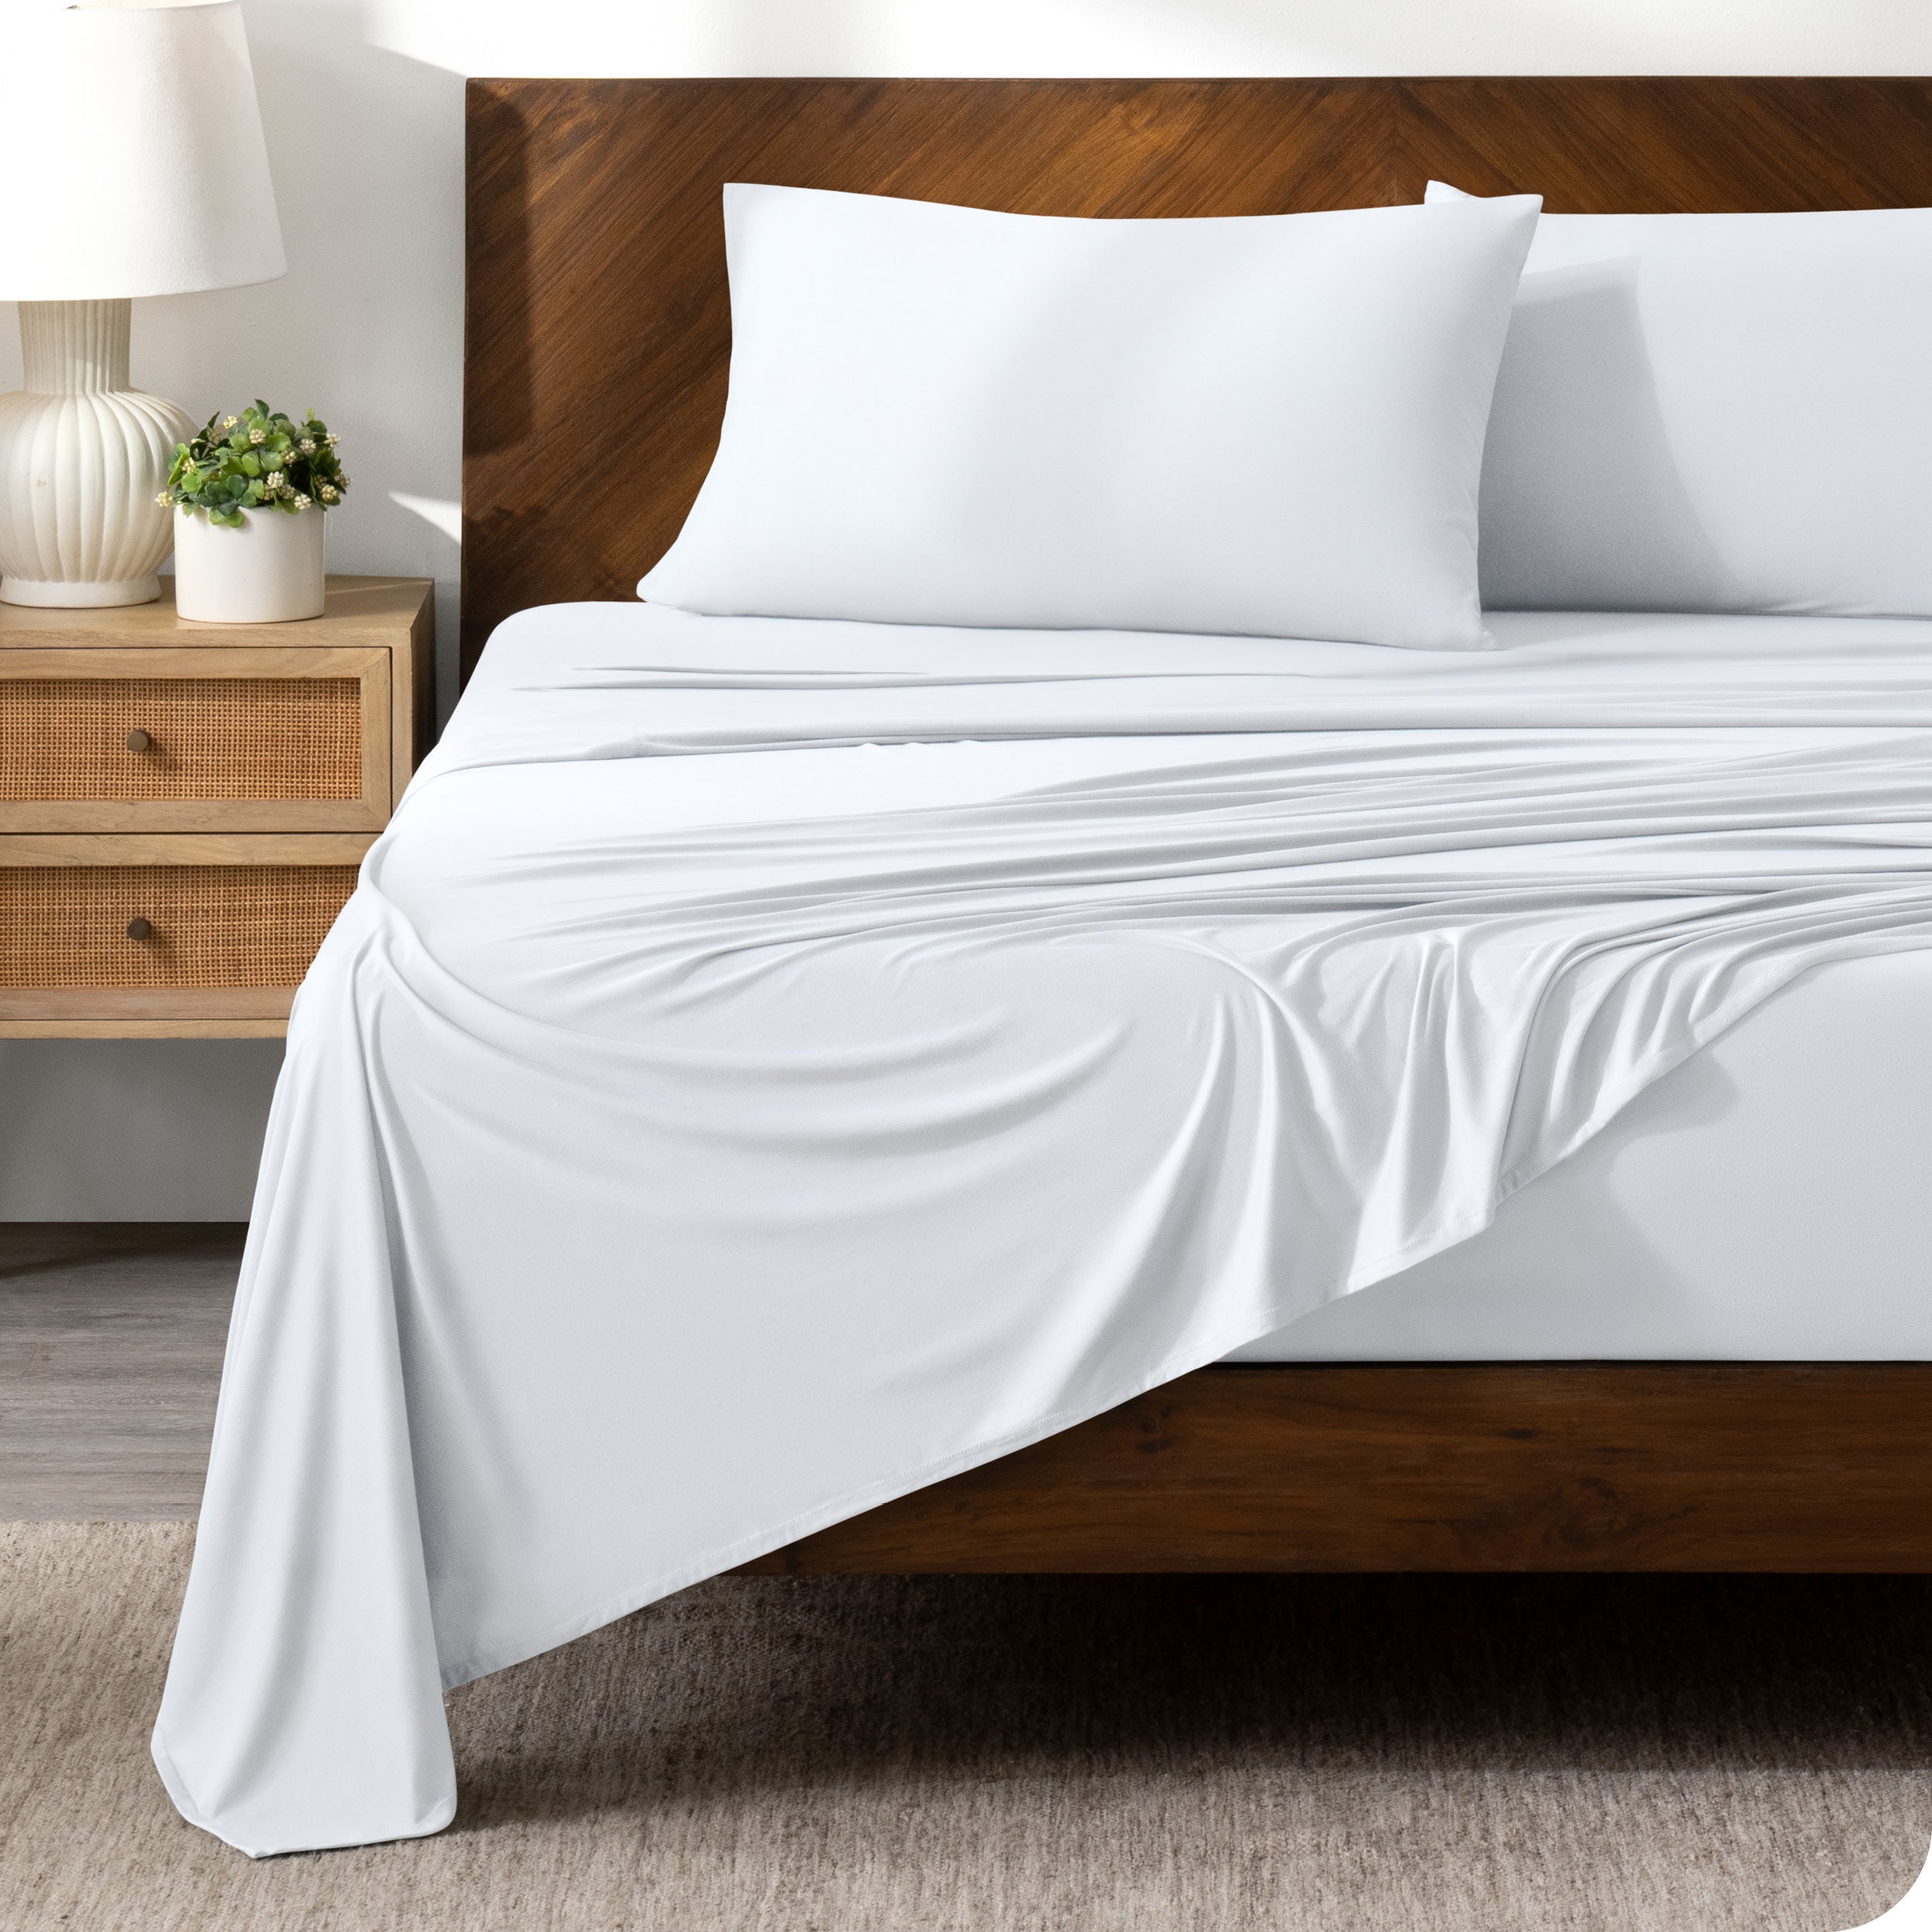 White sheet set on a bed with a dark wooden bed frame